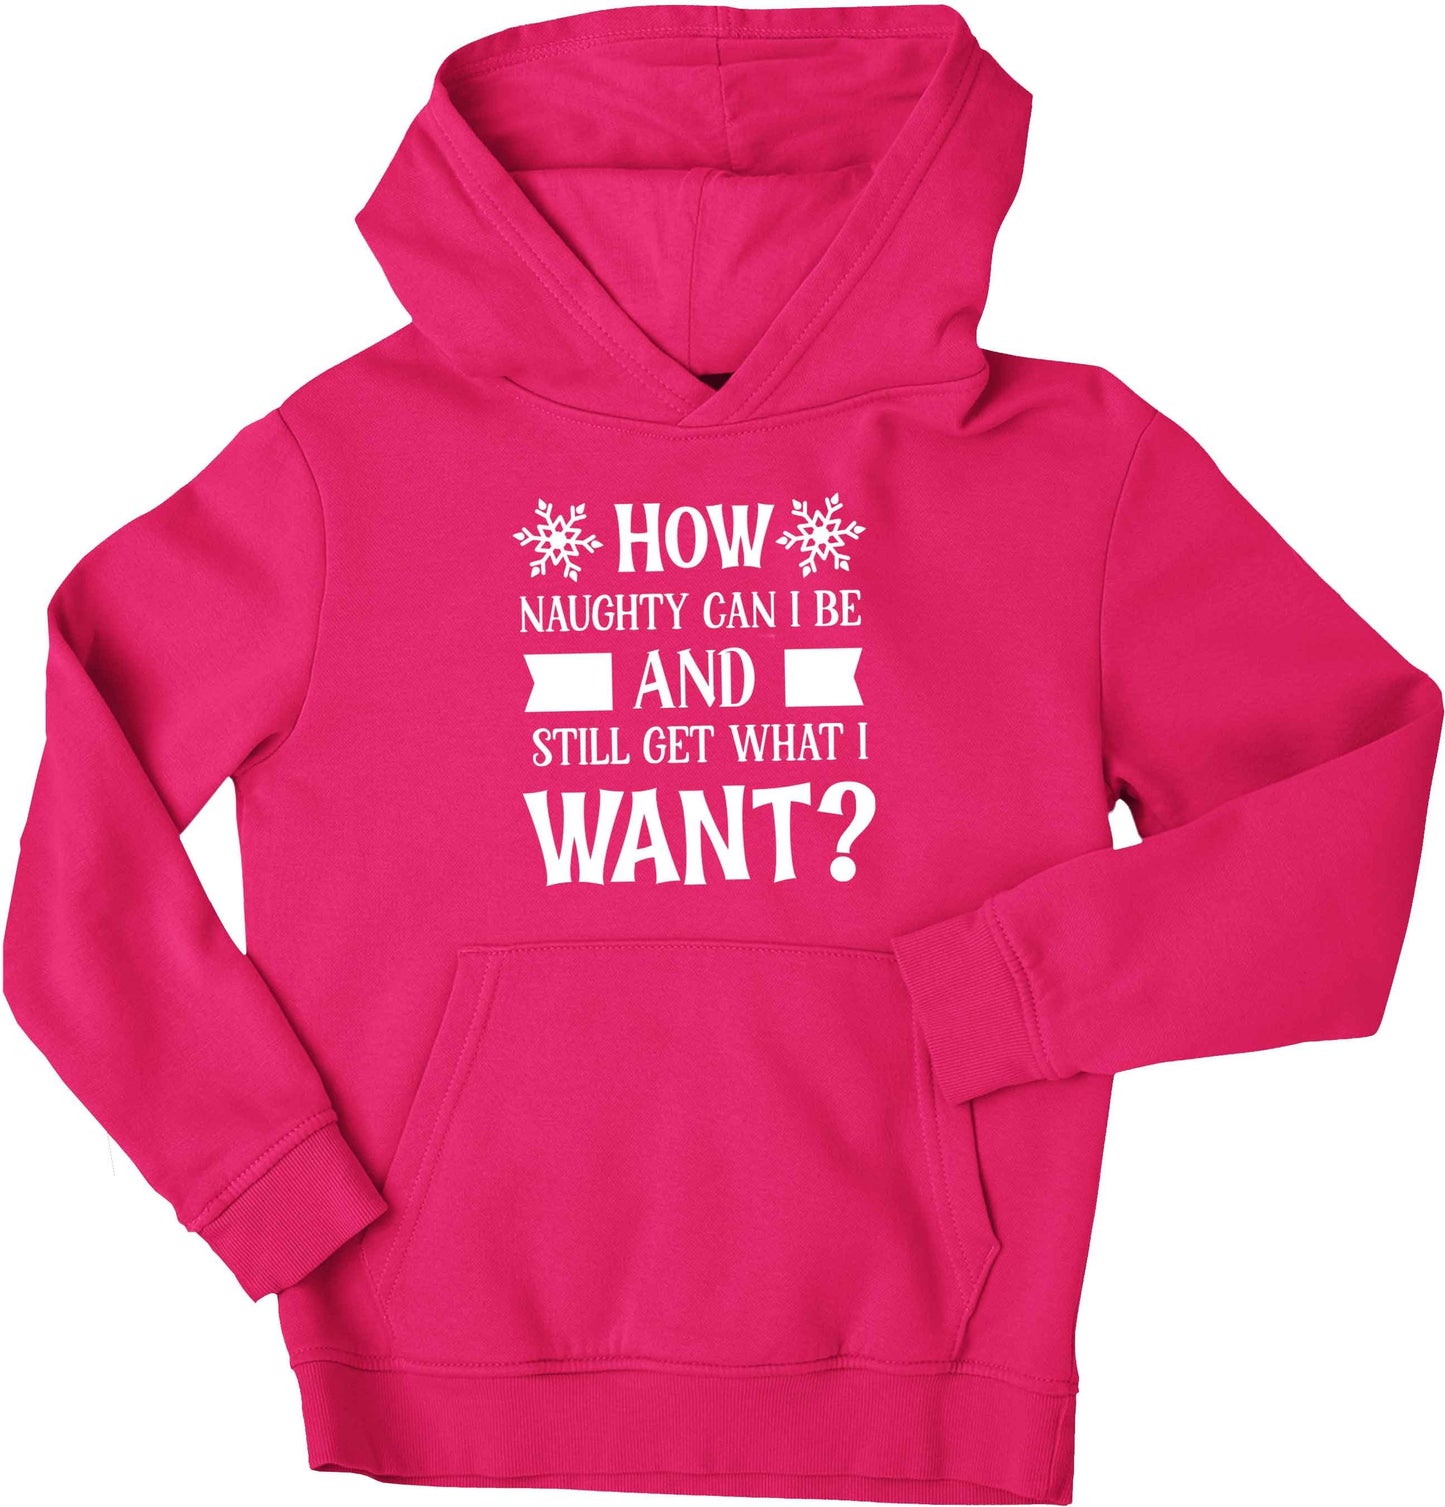 How naughty can I be and still get what I want? children's pink hoodie 12-13 Years